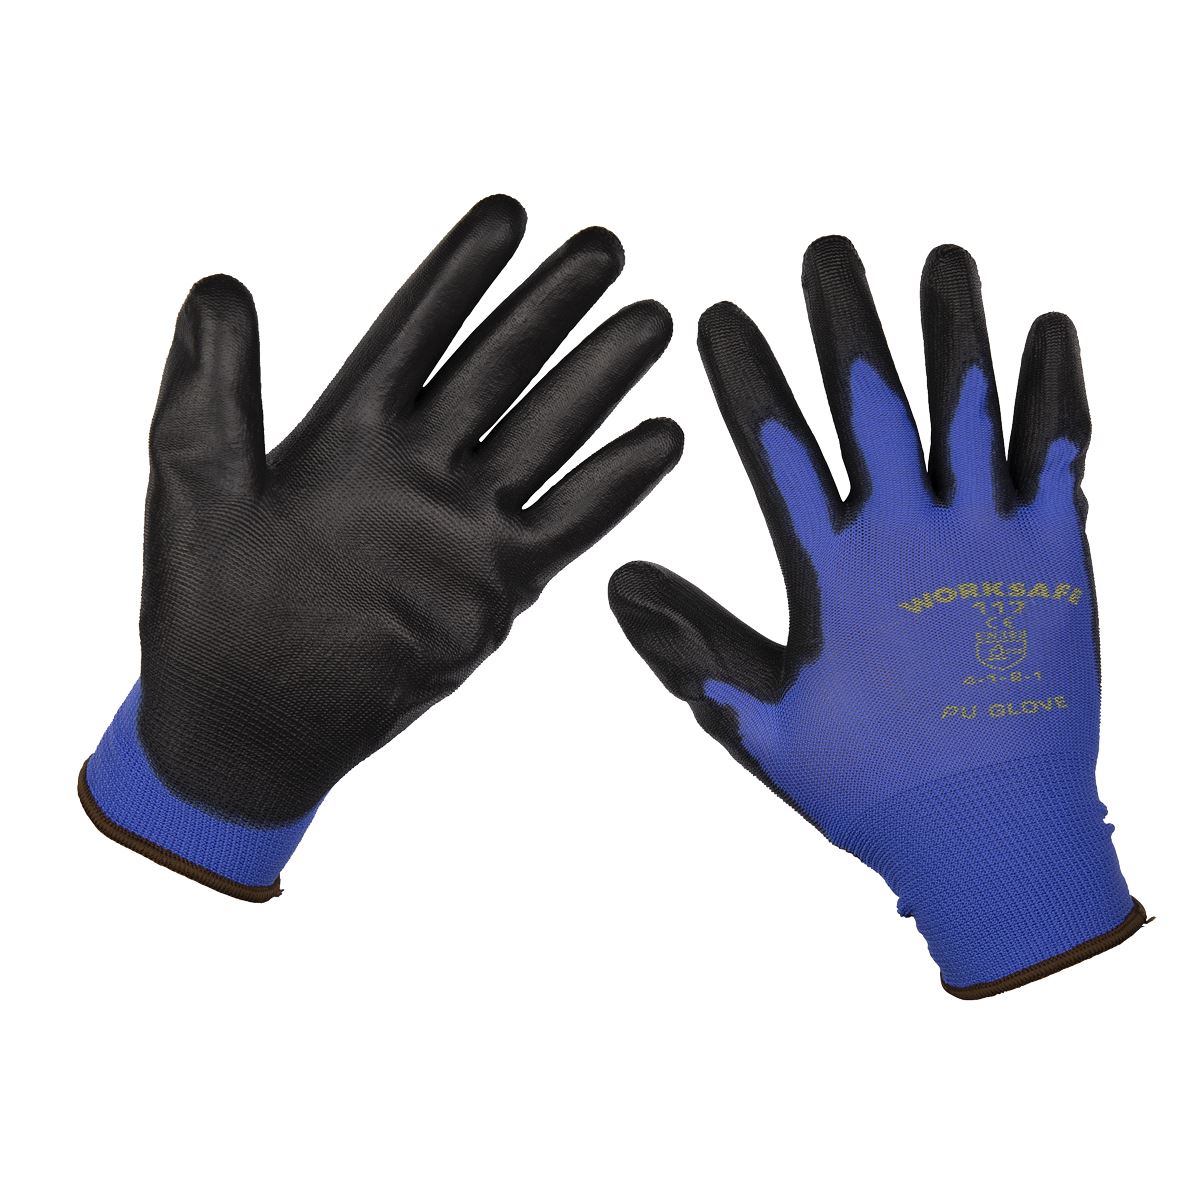 Worksafe by Sealey Lightweight Precision Grip Gloves (X-Large) - Pair